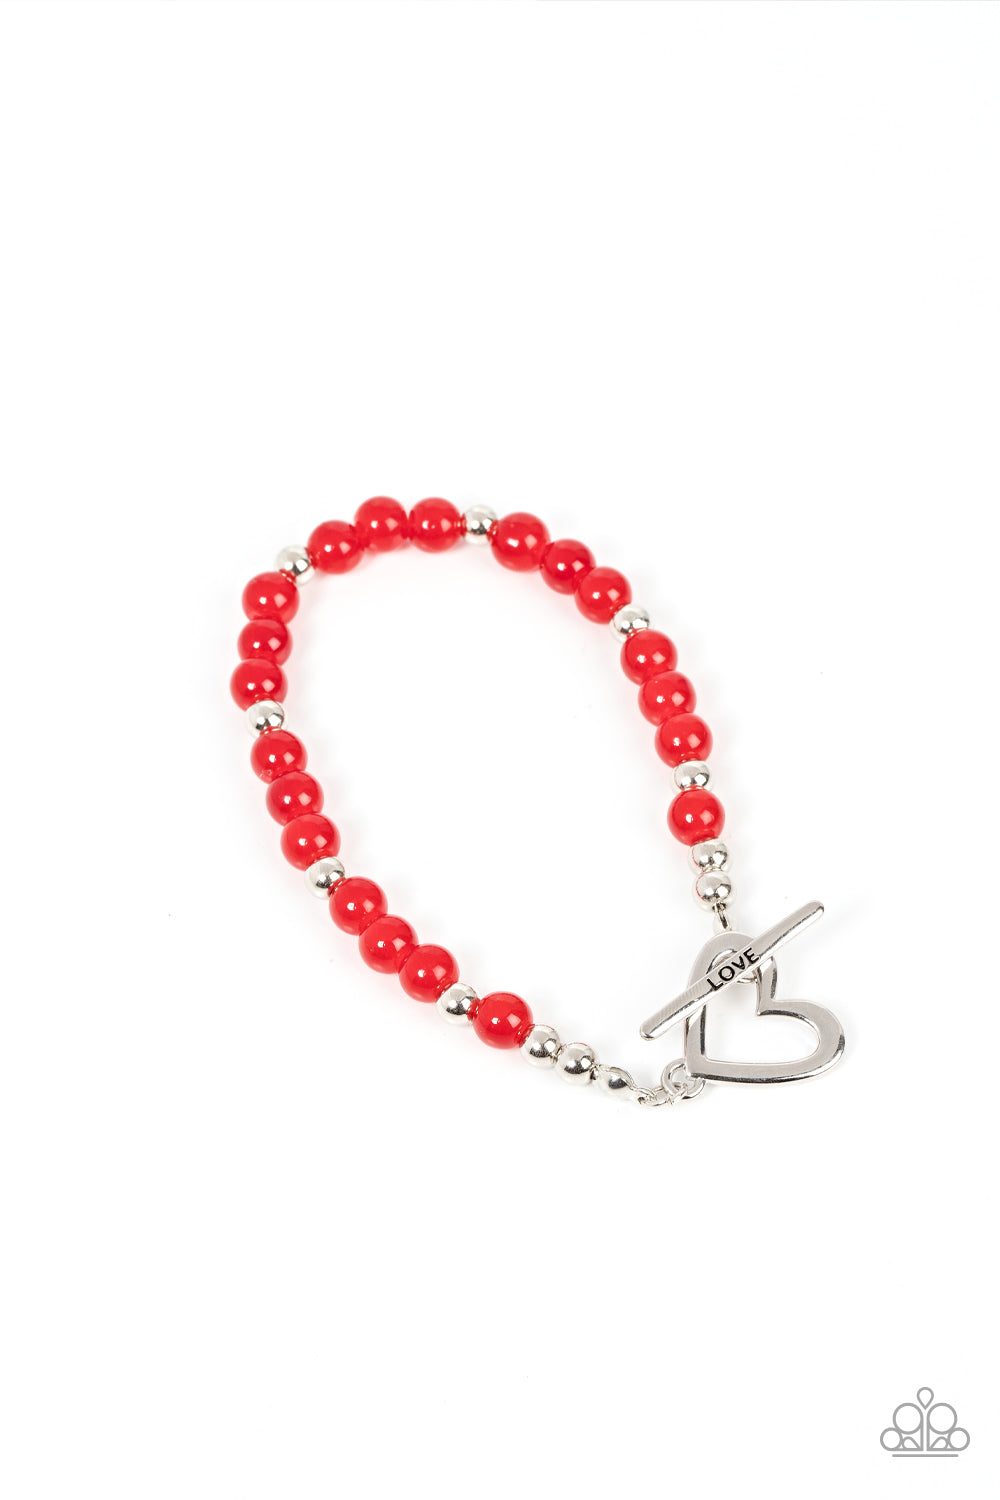 Following My Heart Red Bracelet - Paparazzi Accessories  A shiny silver heart frame interlocks with a toggle closure at the center of a shiny silver and glassy red beaded bracelet. The silver toggle is stamped in the word, "love," for a romantic finish. Features a toggle closure.  Sold as one individual bracelet.